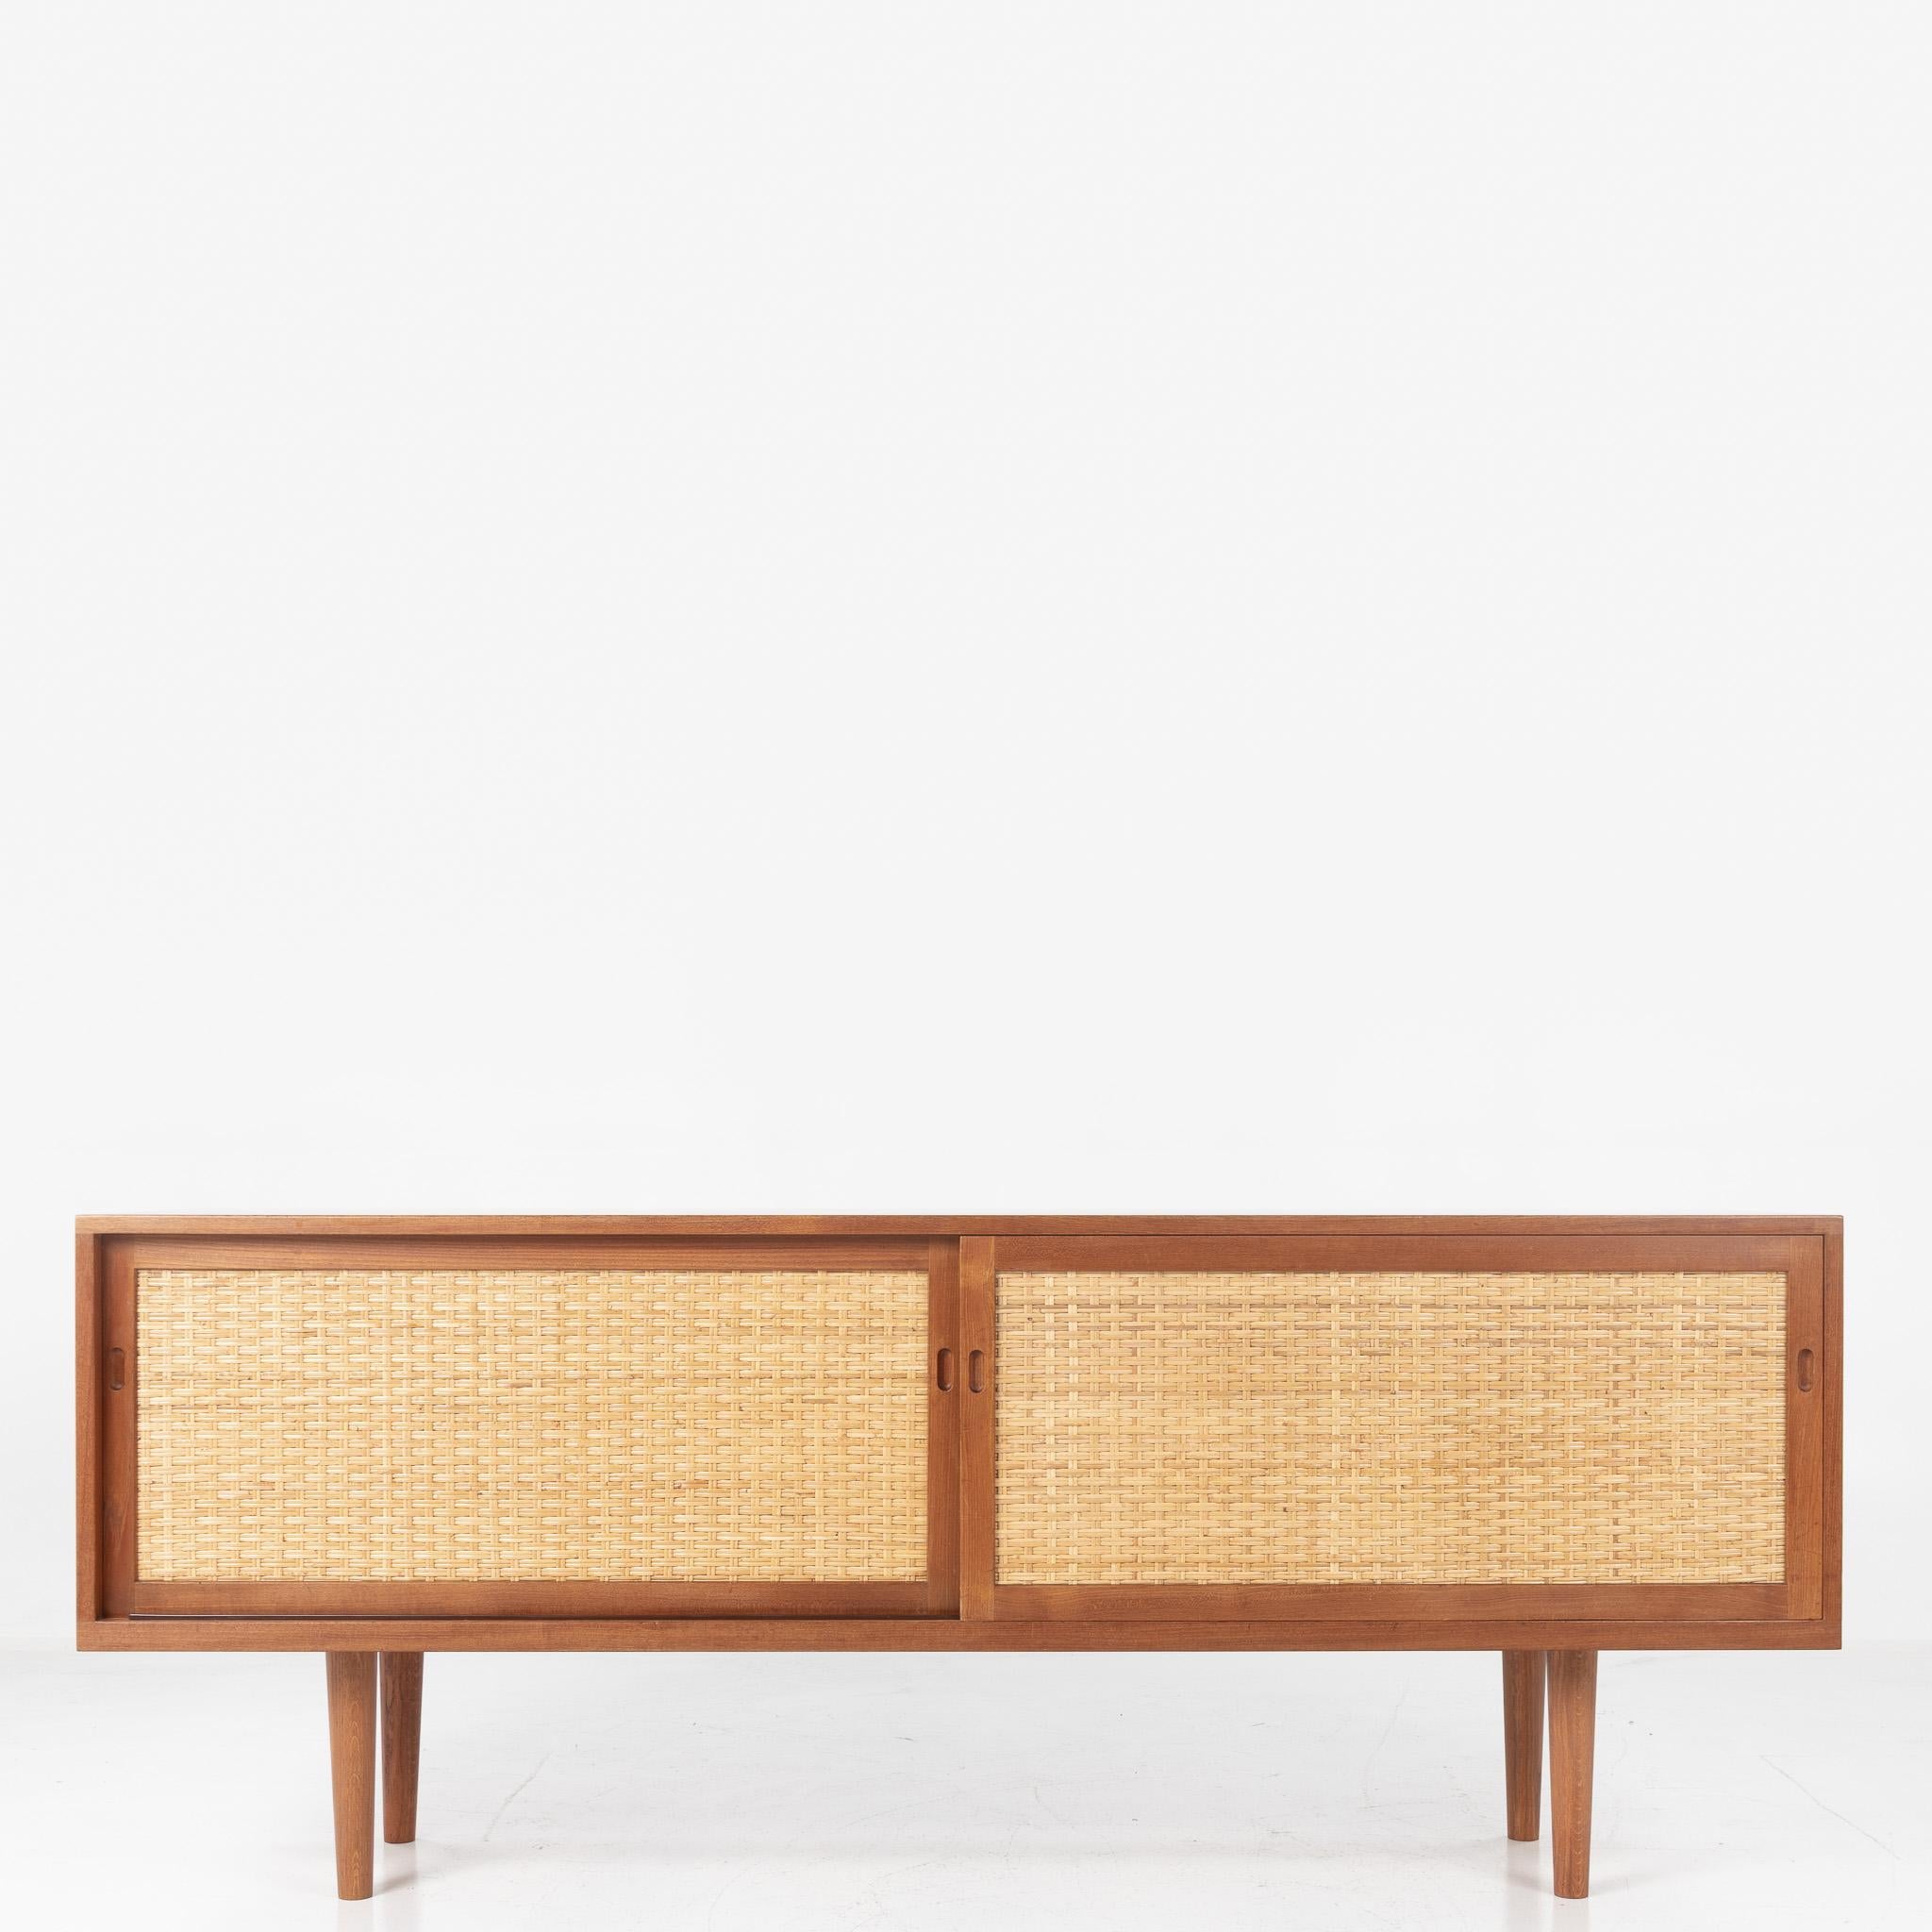 RY 26 - Sideboard in teak with decor and two sliding doors in patinated cane. Architect Hans J. Wegner for Ry Møbler.